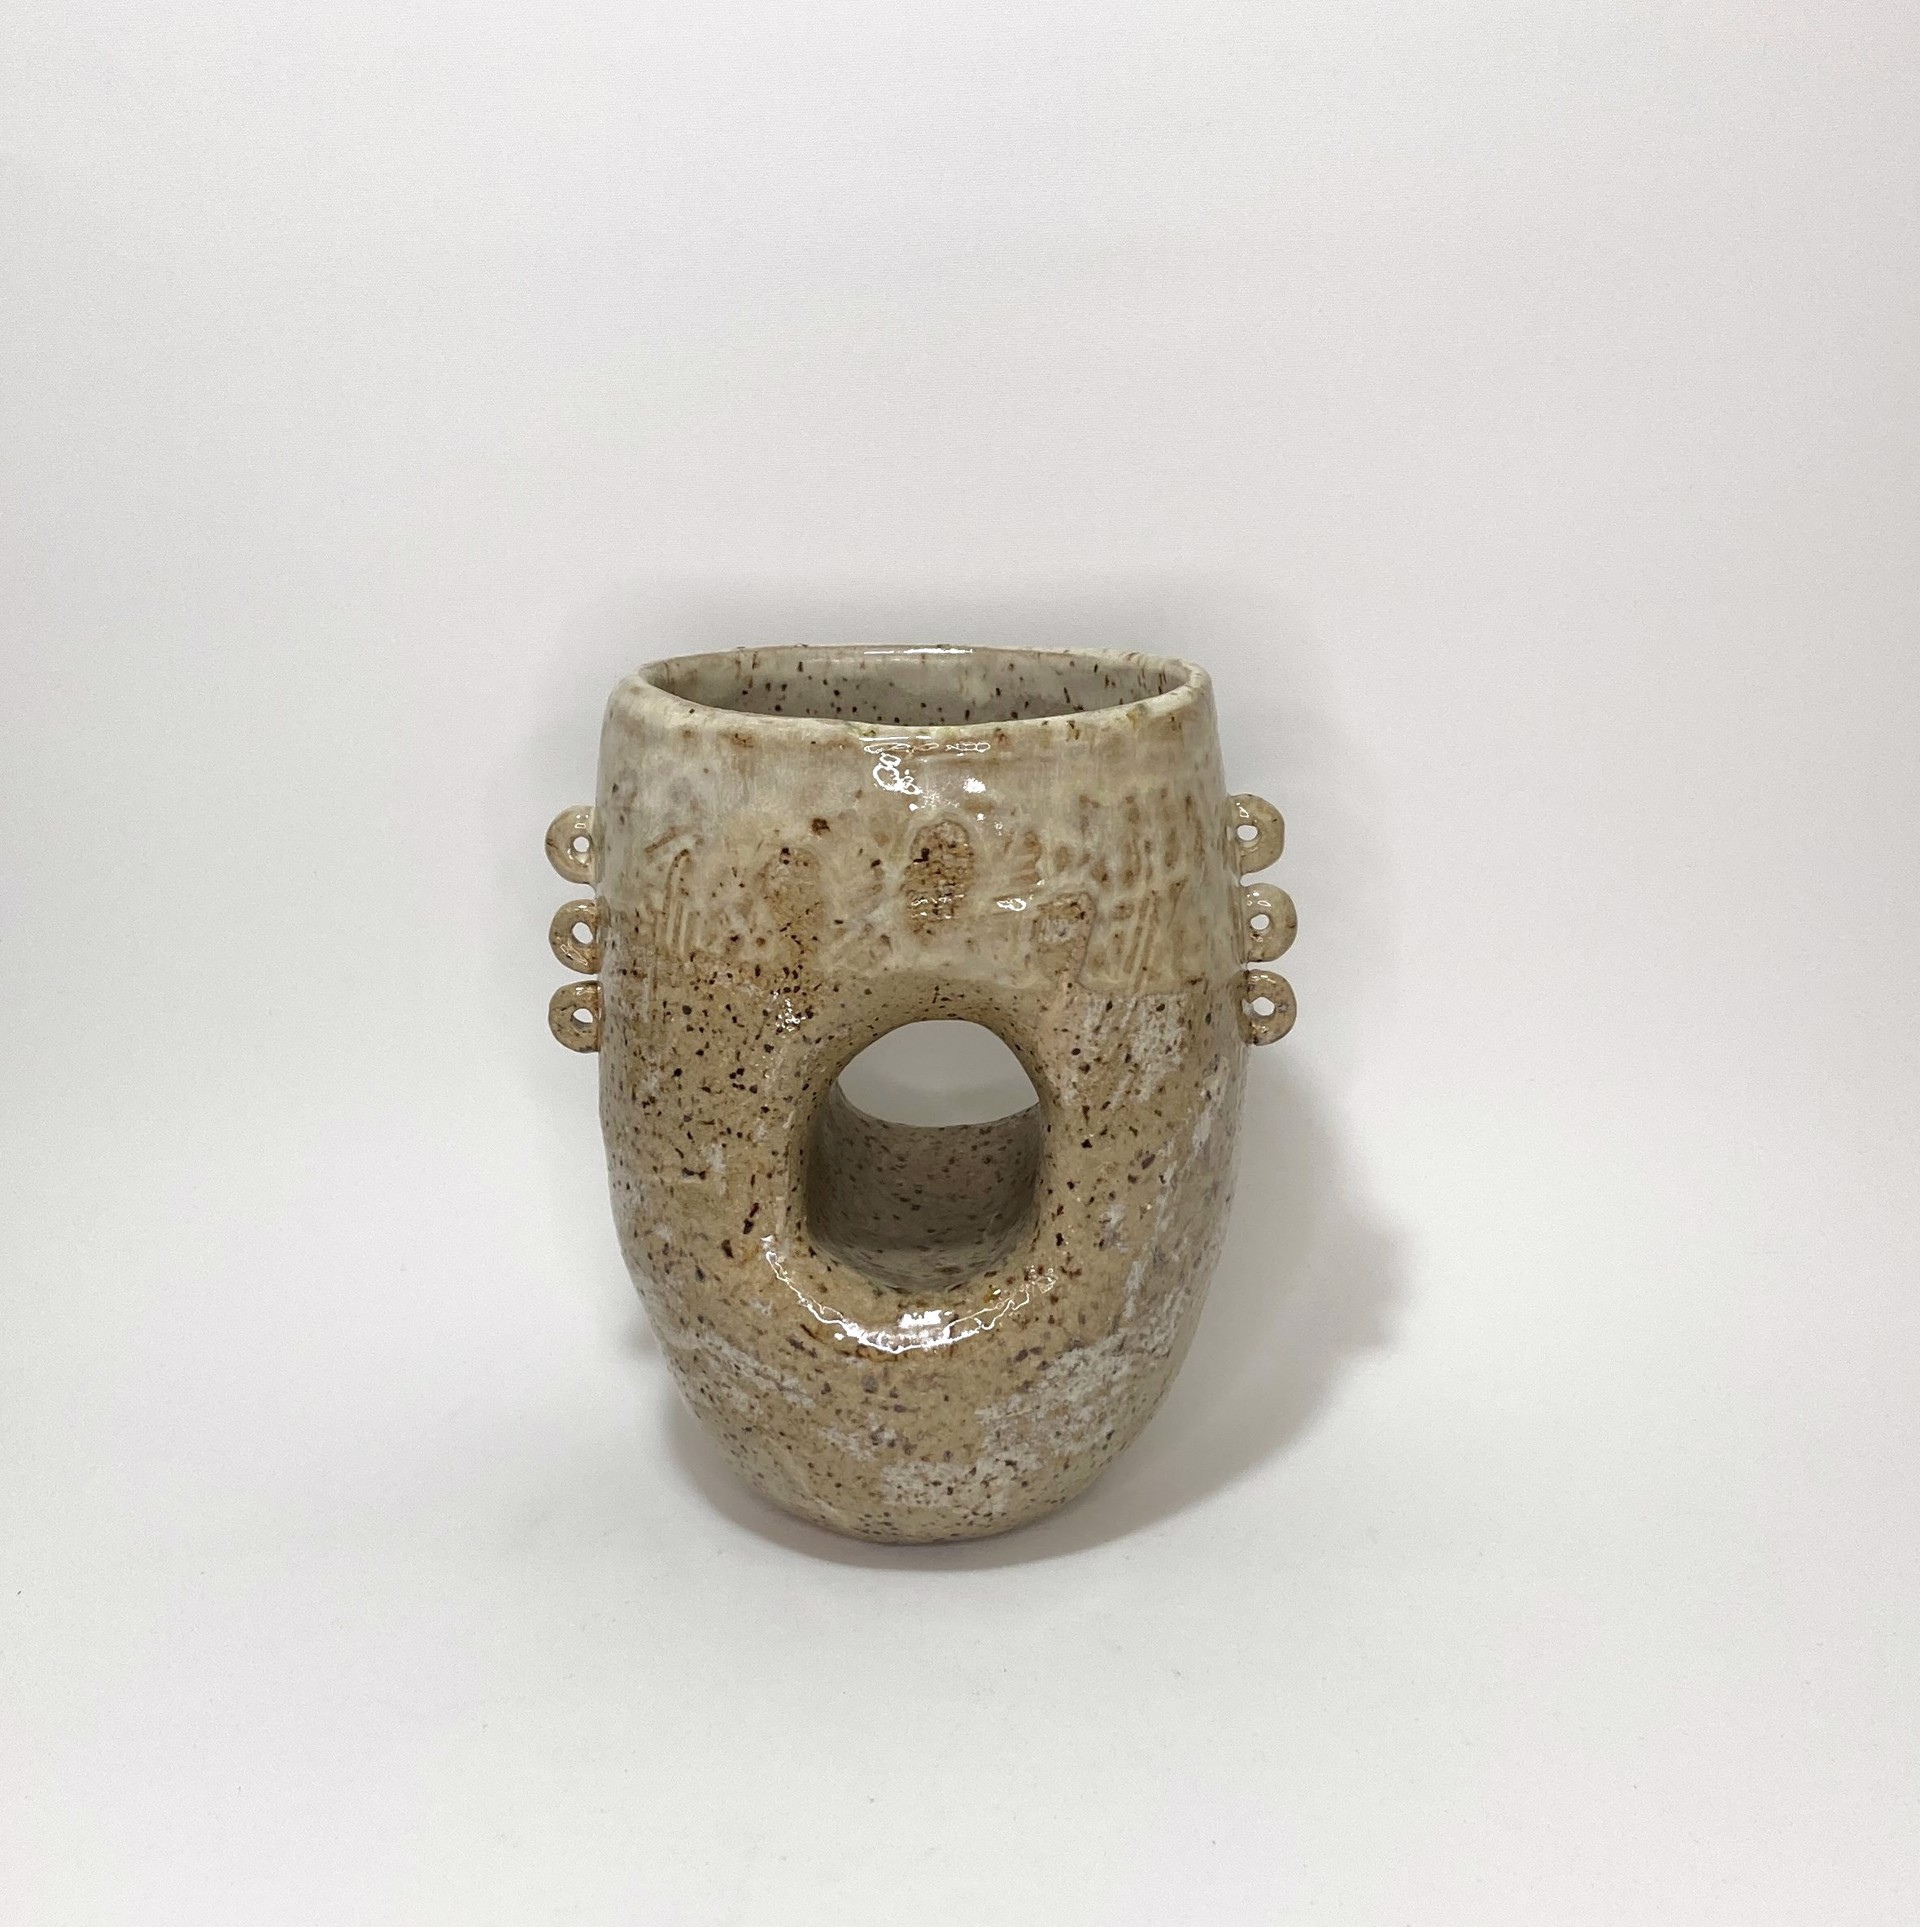 Lacuna Pot with 6 Lugs by Mary Delmege